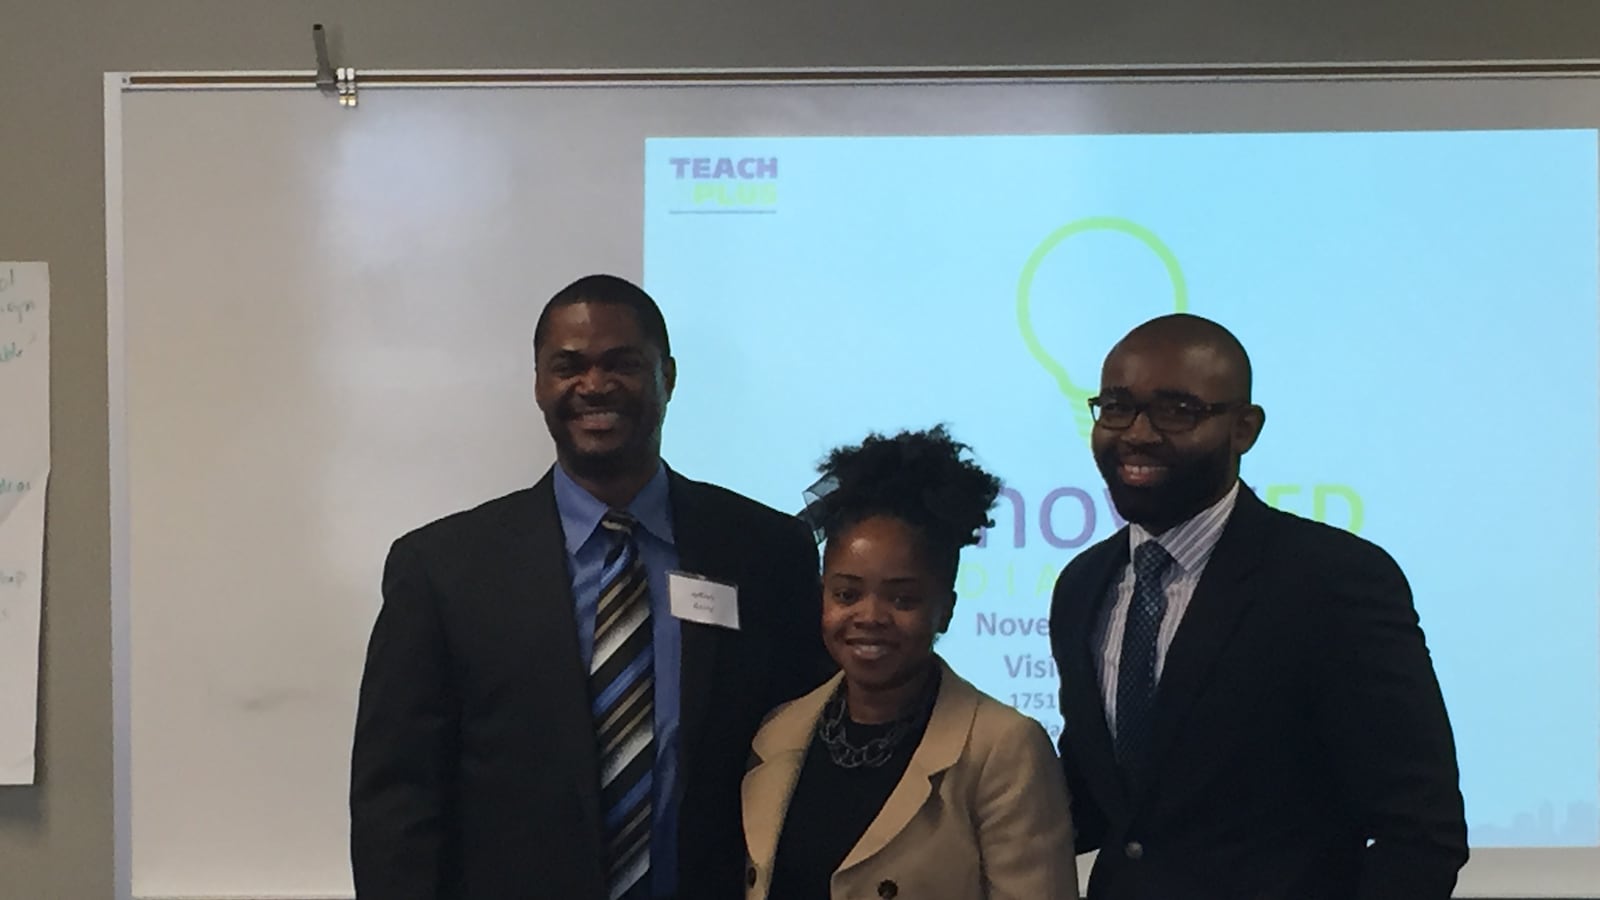 Jeffrey Berry, Tiffany Thomas and Darius Sawyers receive applause after being named as winners at Teach Plus' InnovatEd conference.